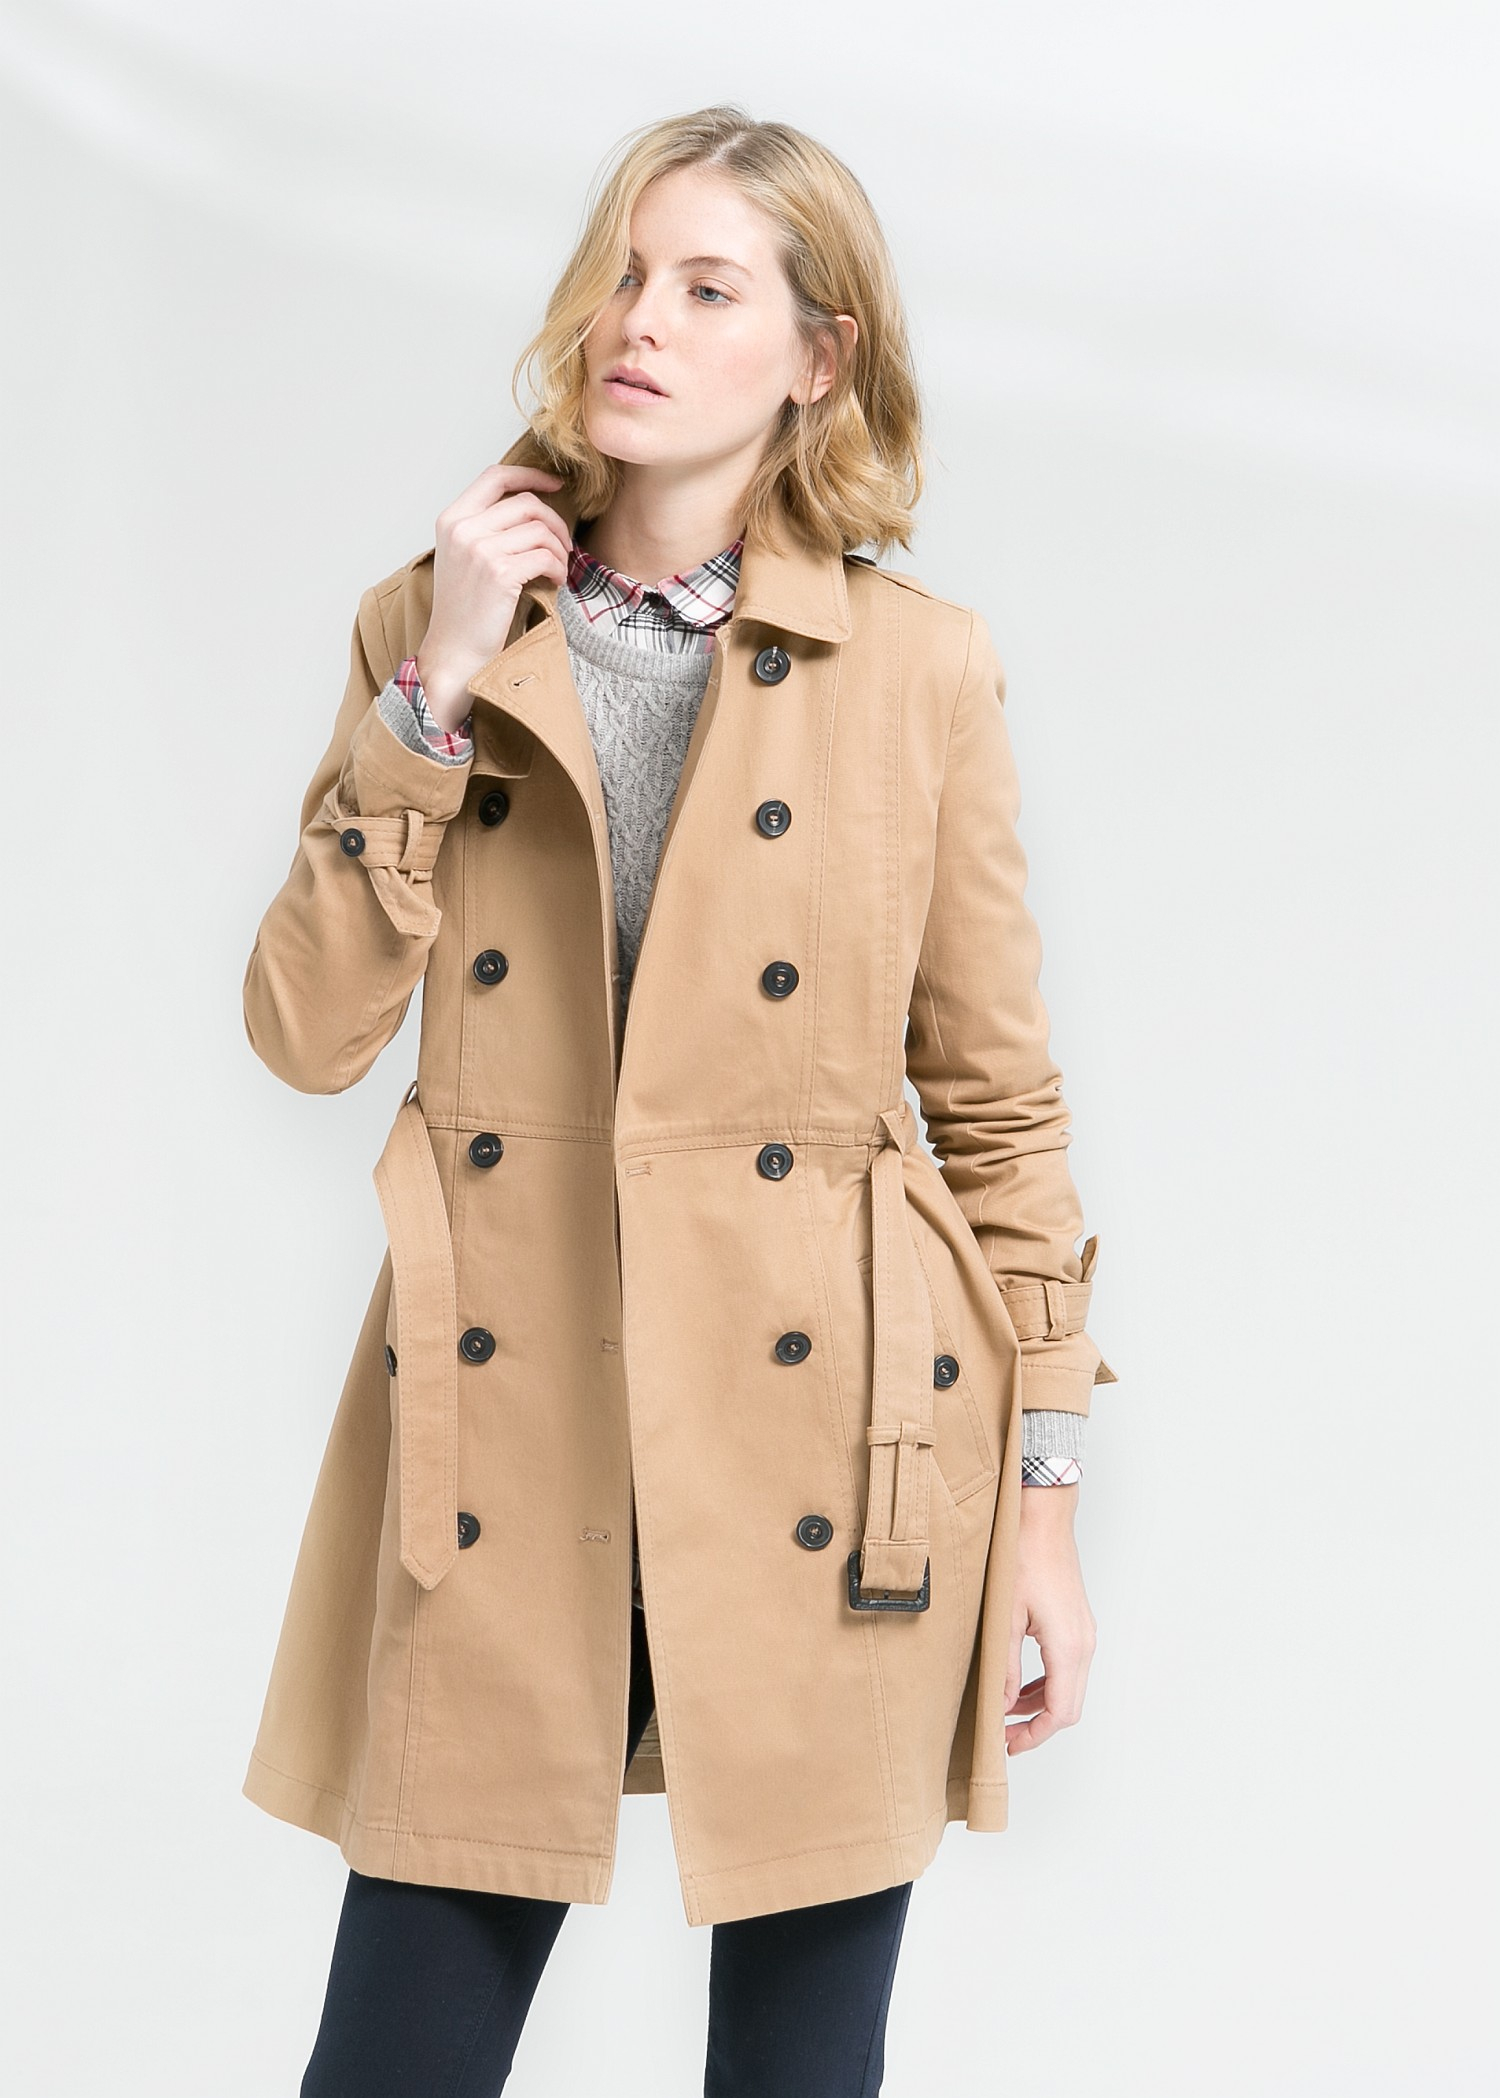 Lyst - Mango Classic Cotton Trench Coat in Natural